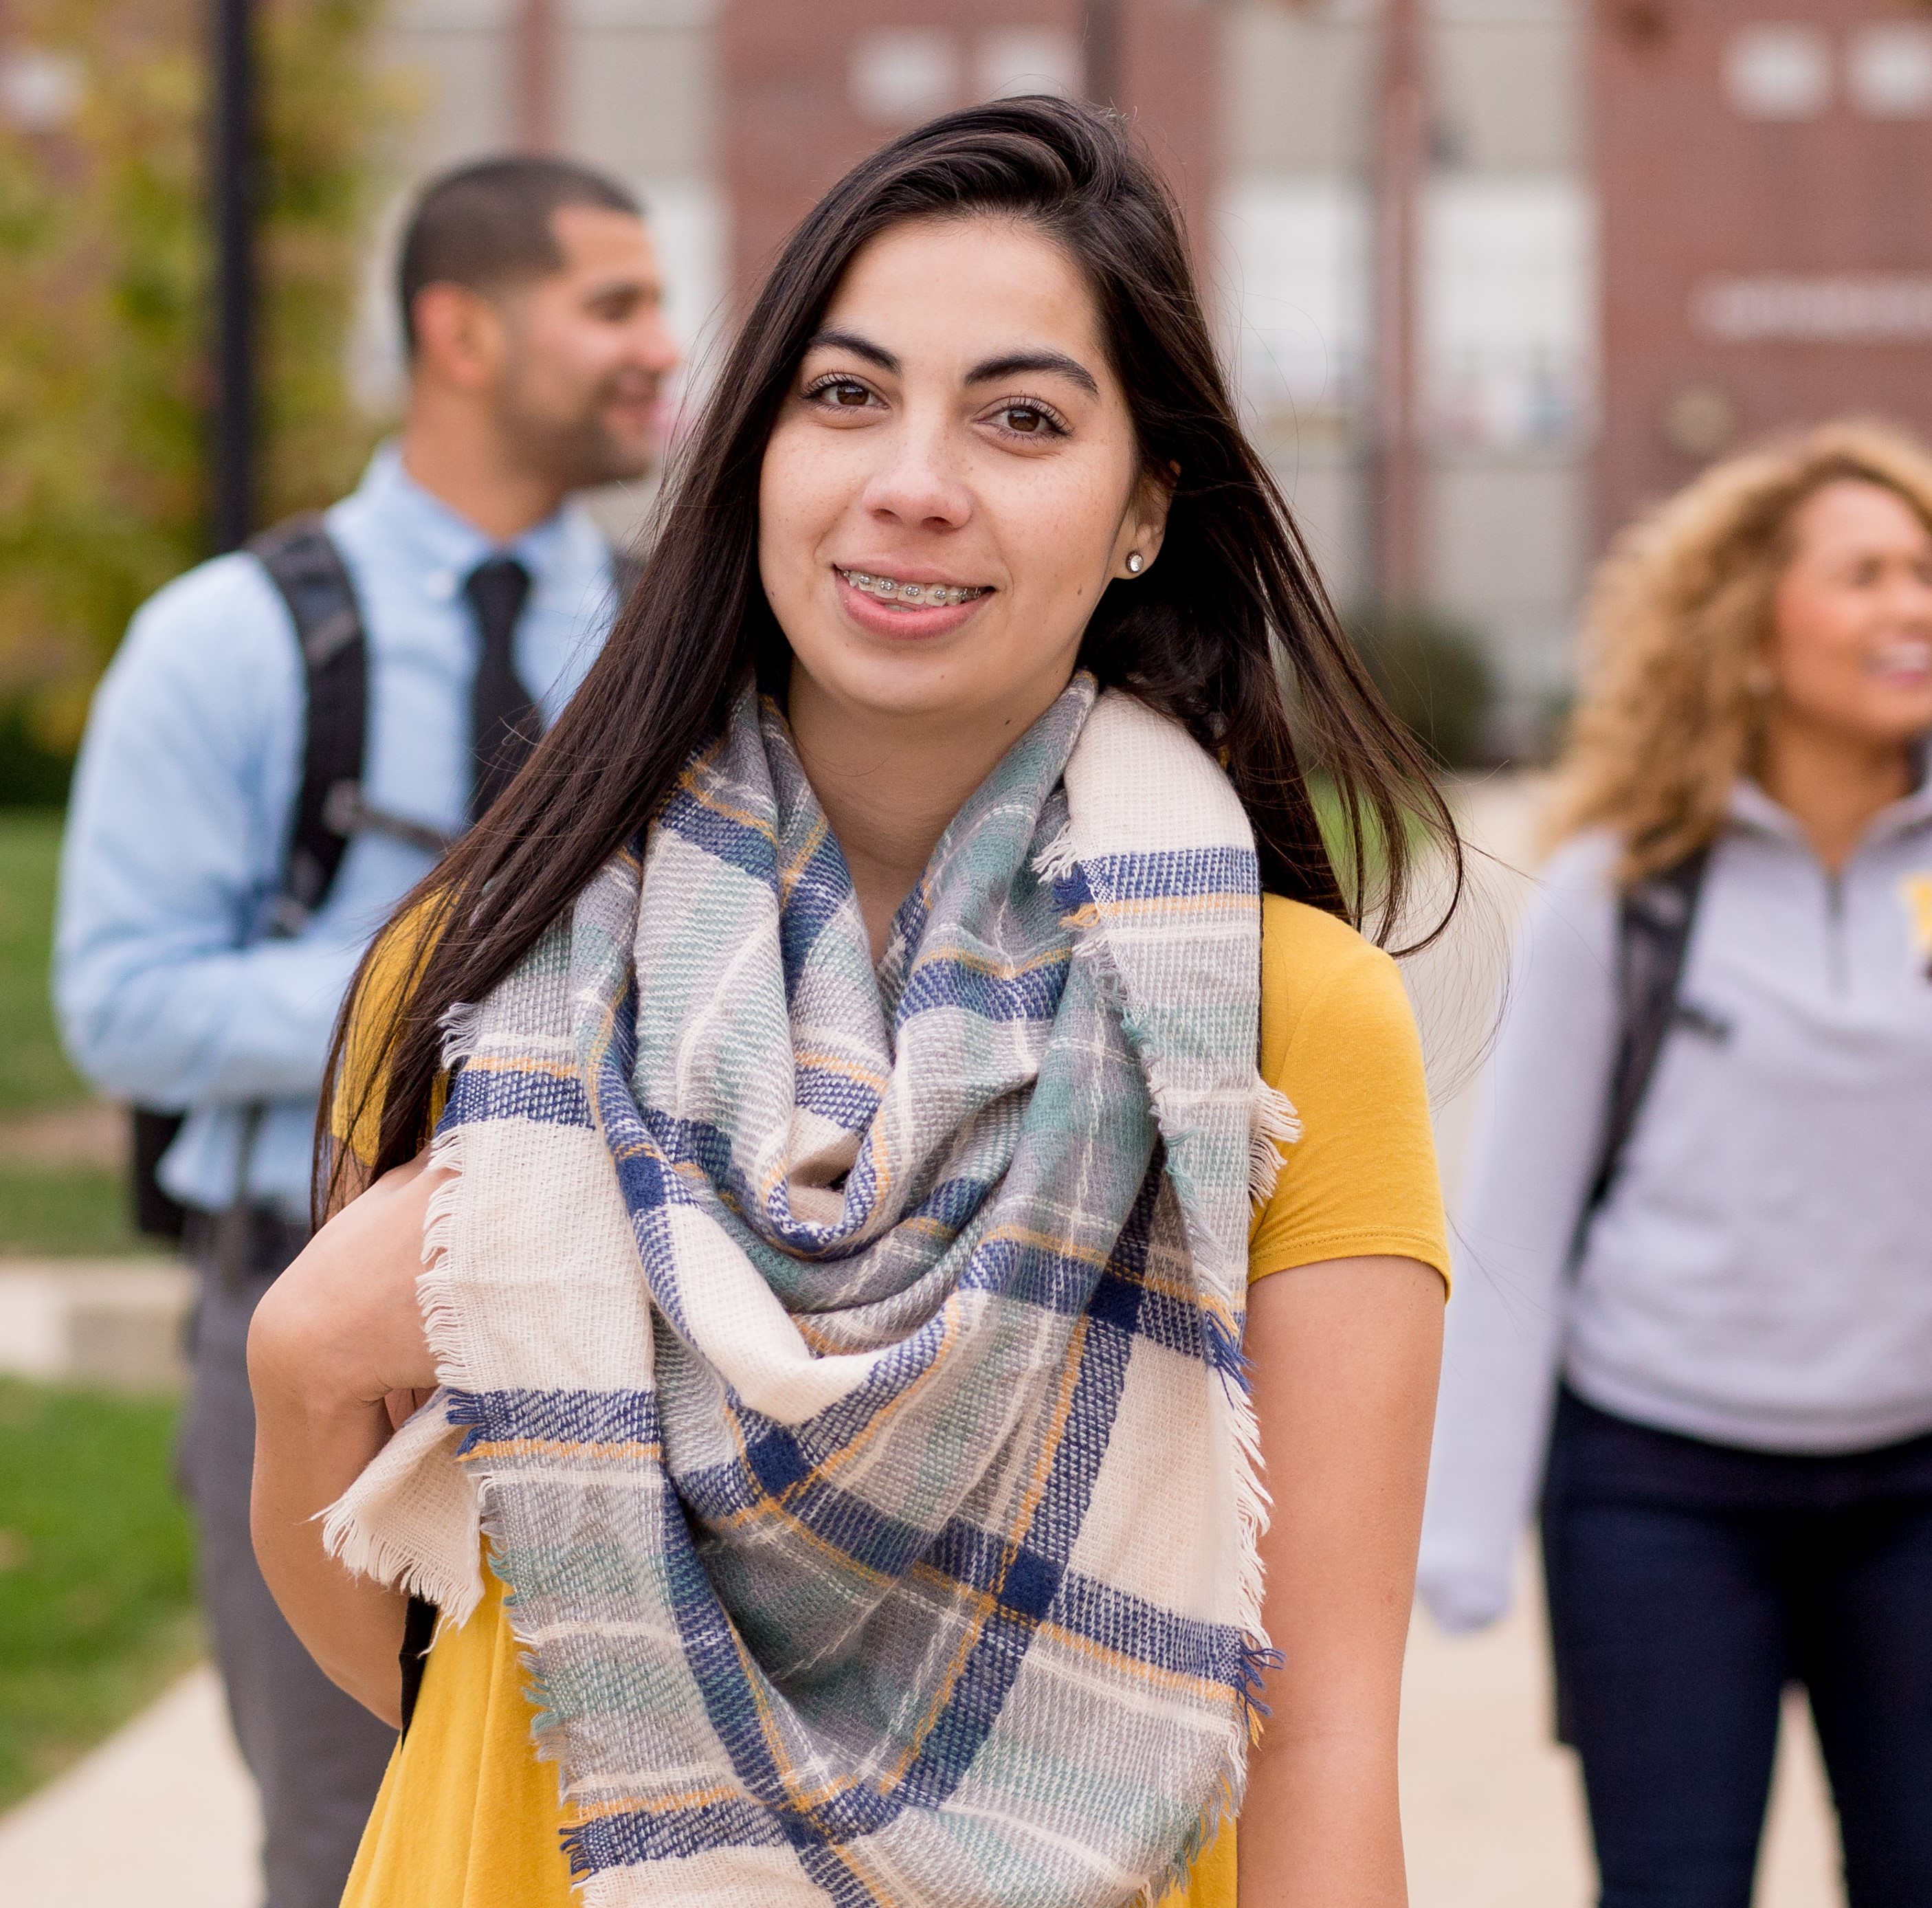 Female students smiling while walking on a path in front of Old Main, with other students also walking on the same path in the background